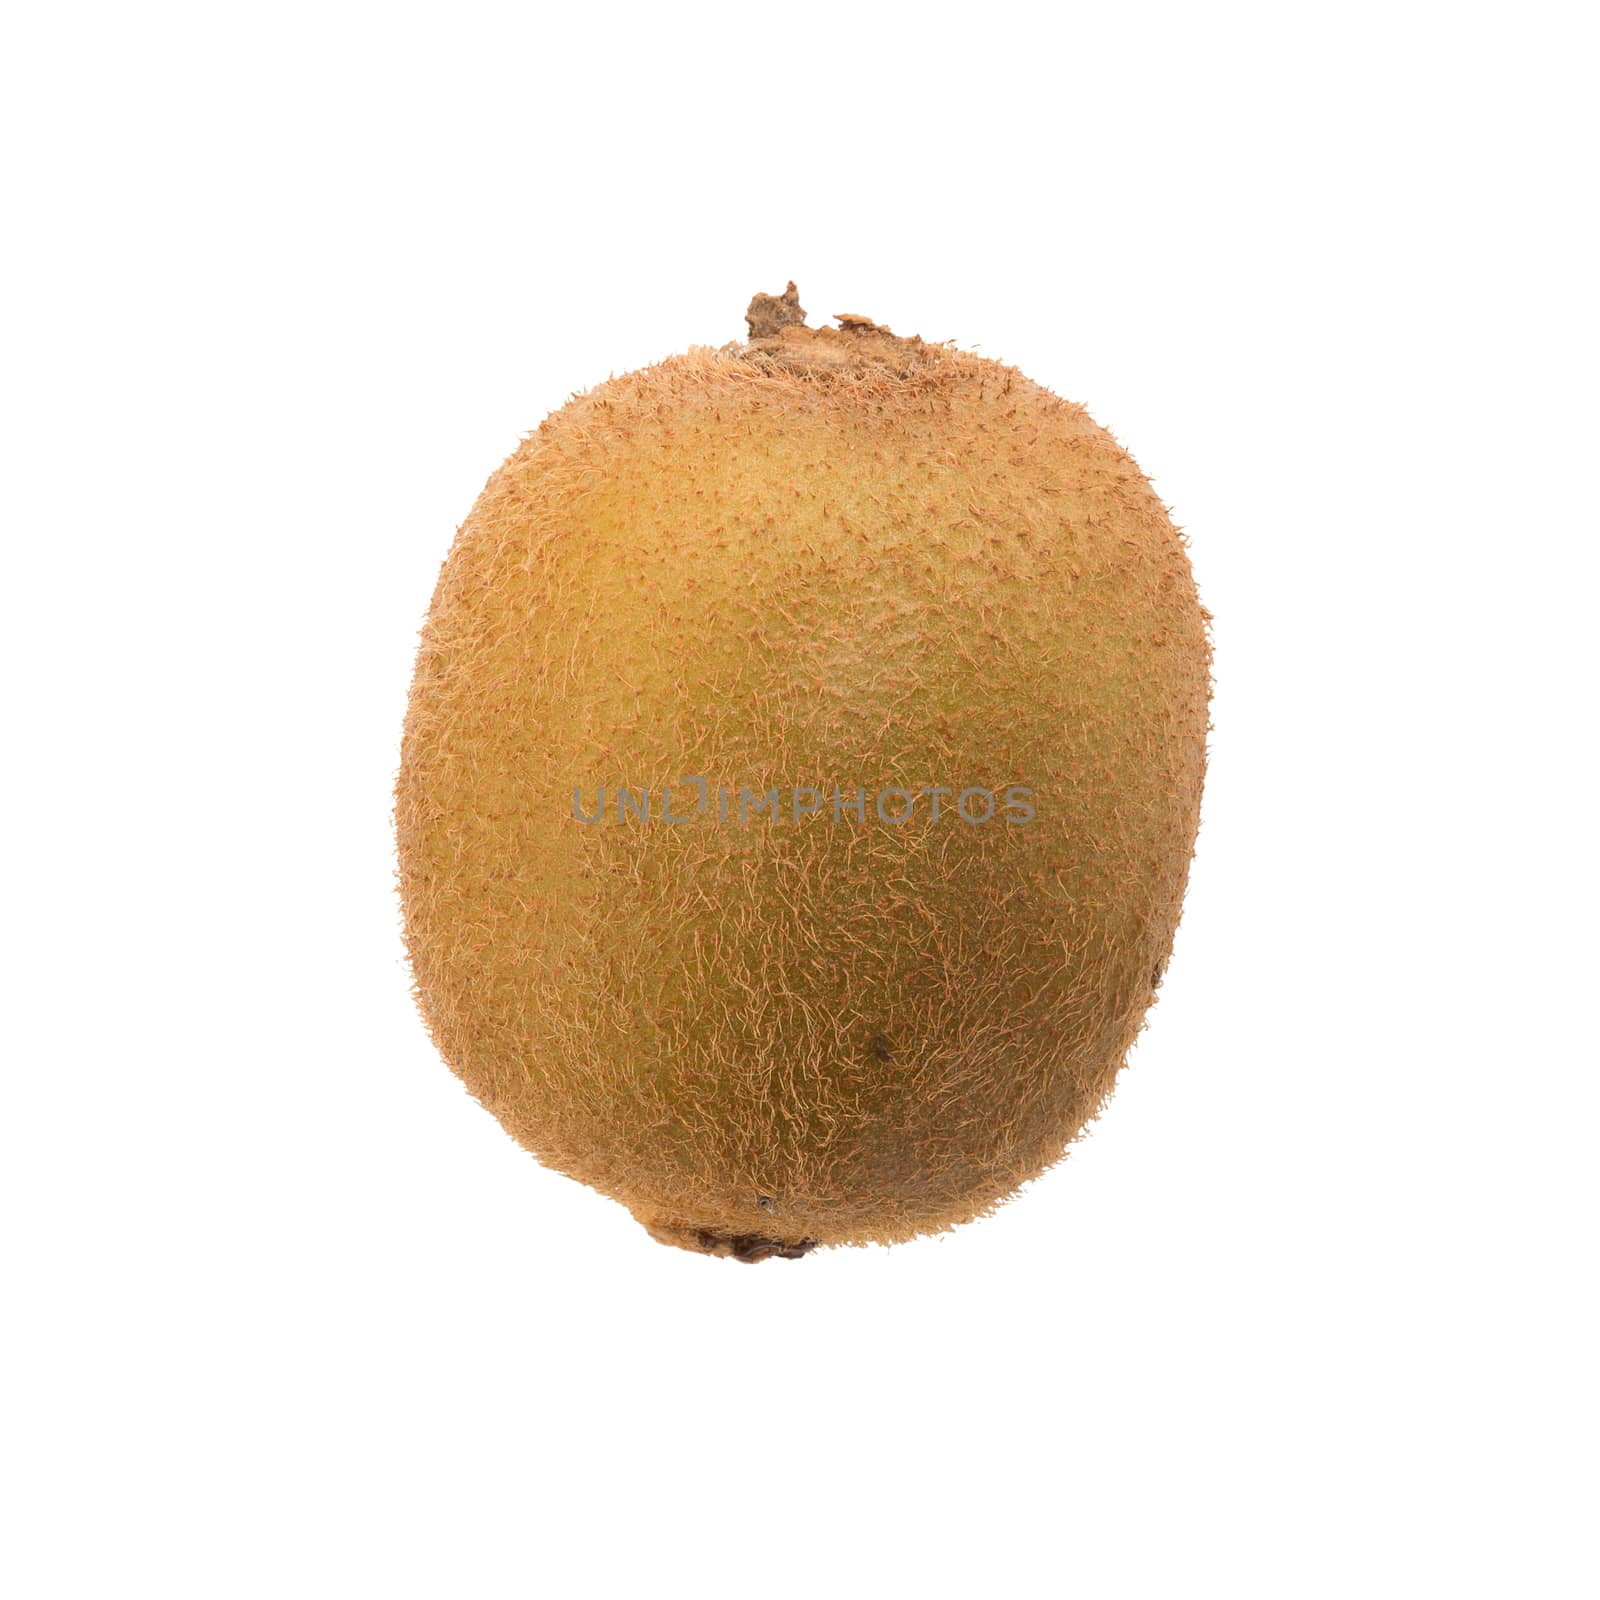 kiwi isolated on white background, top view by kaiskynet